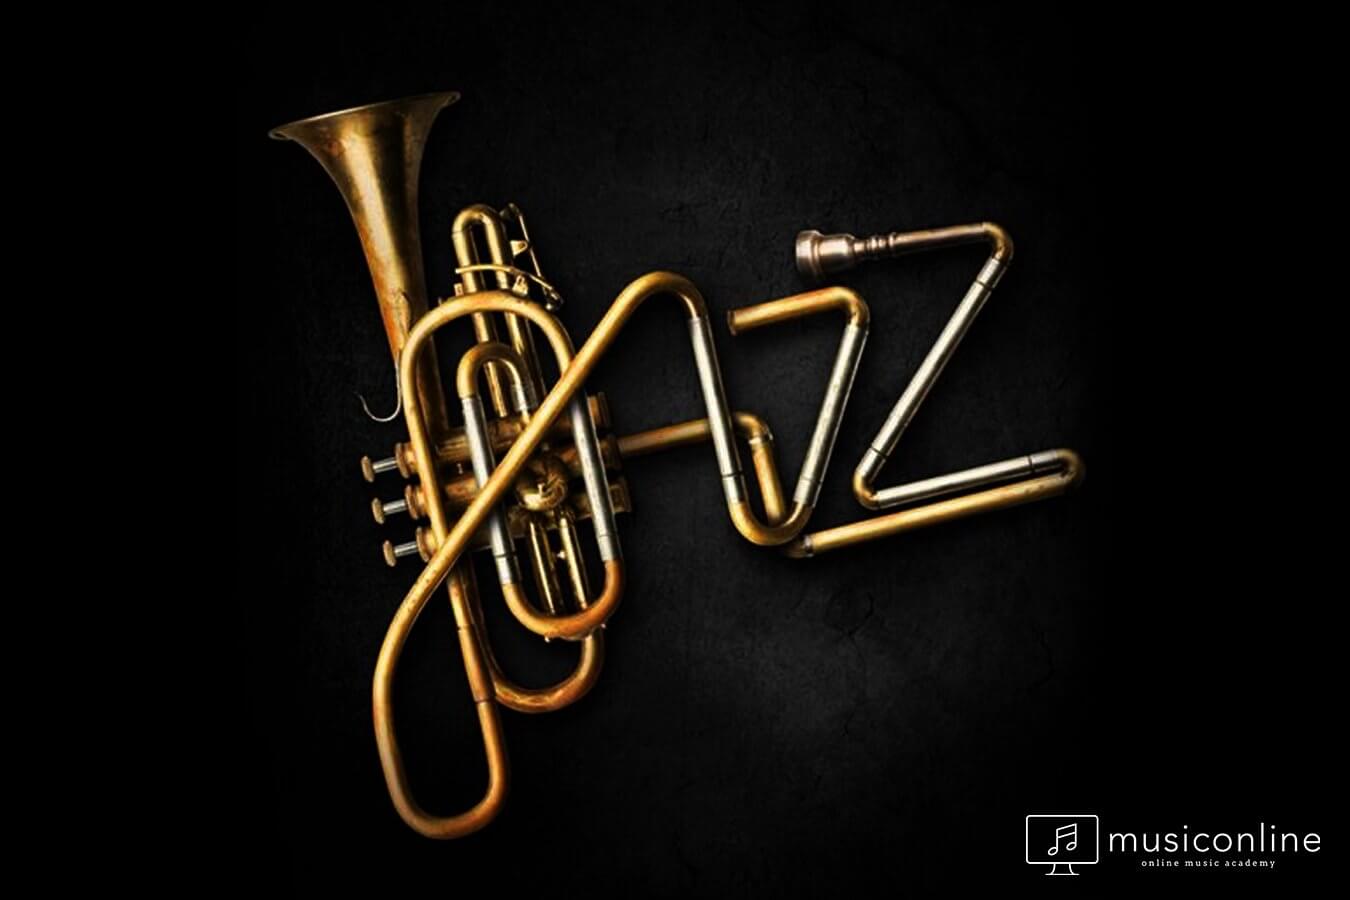 The Brief History of Jazz Music